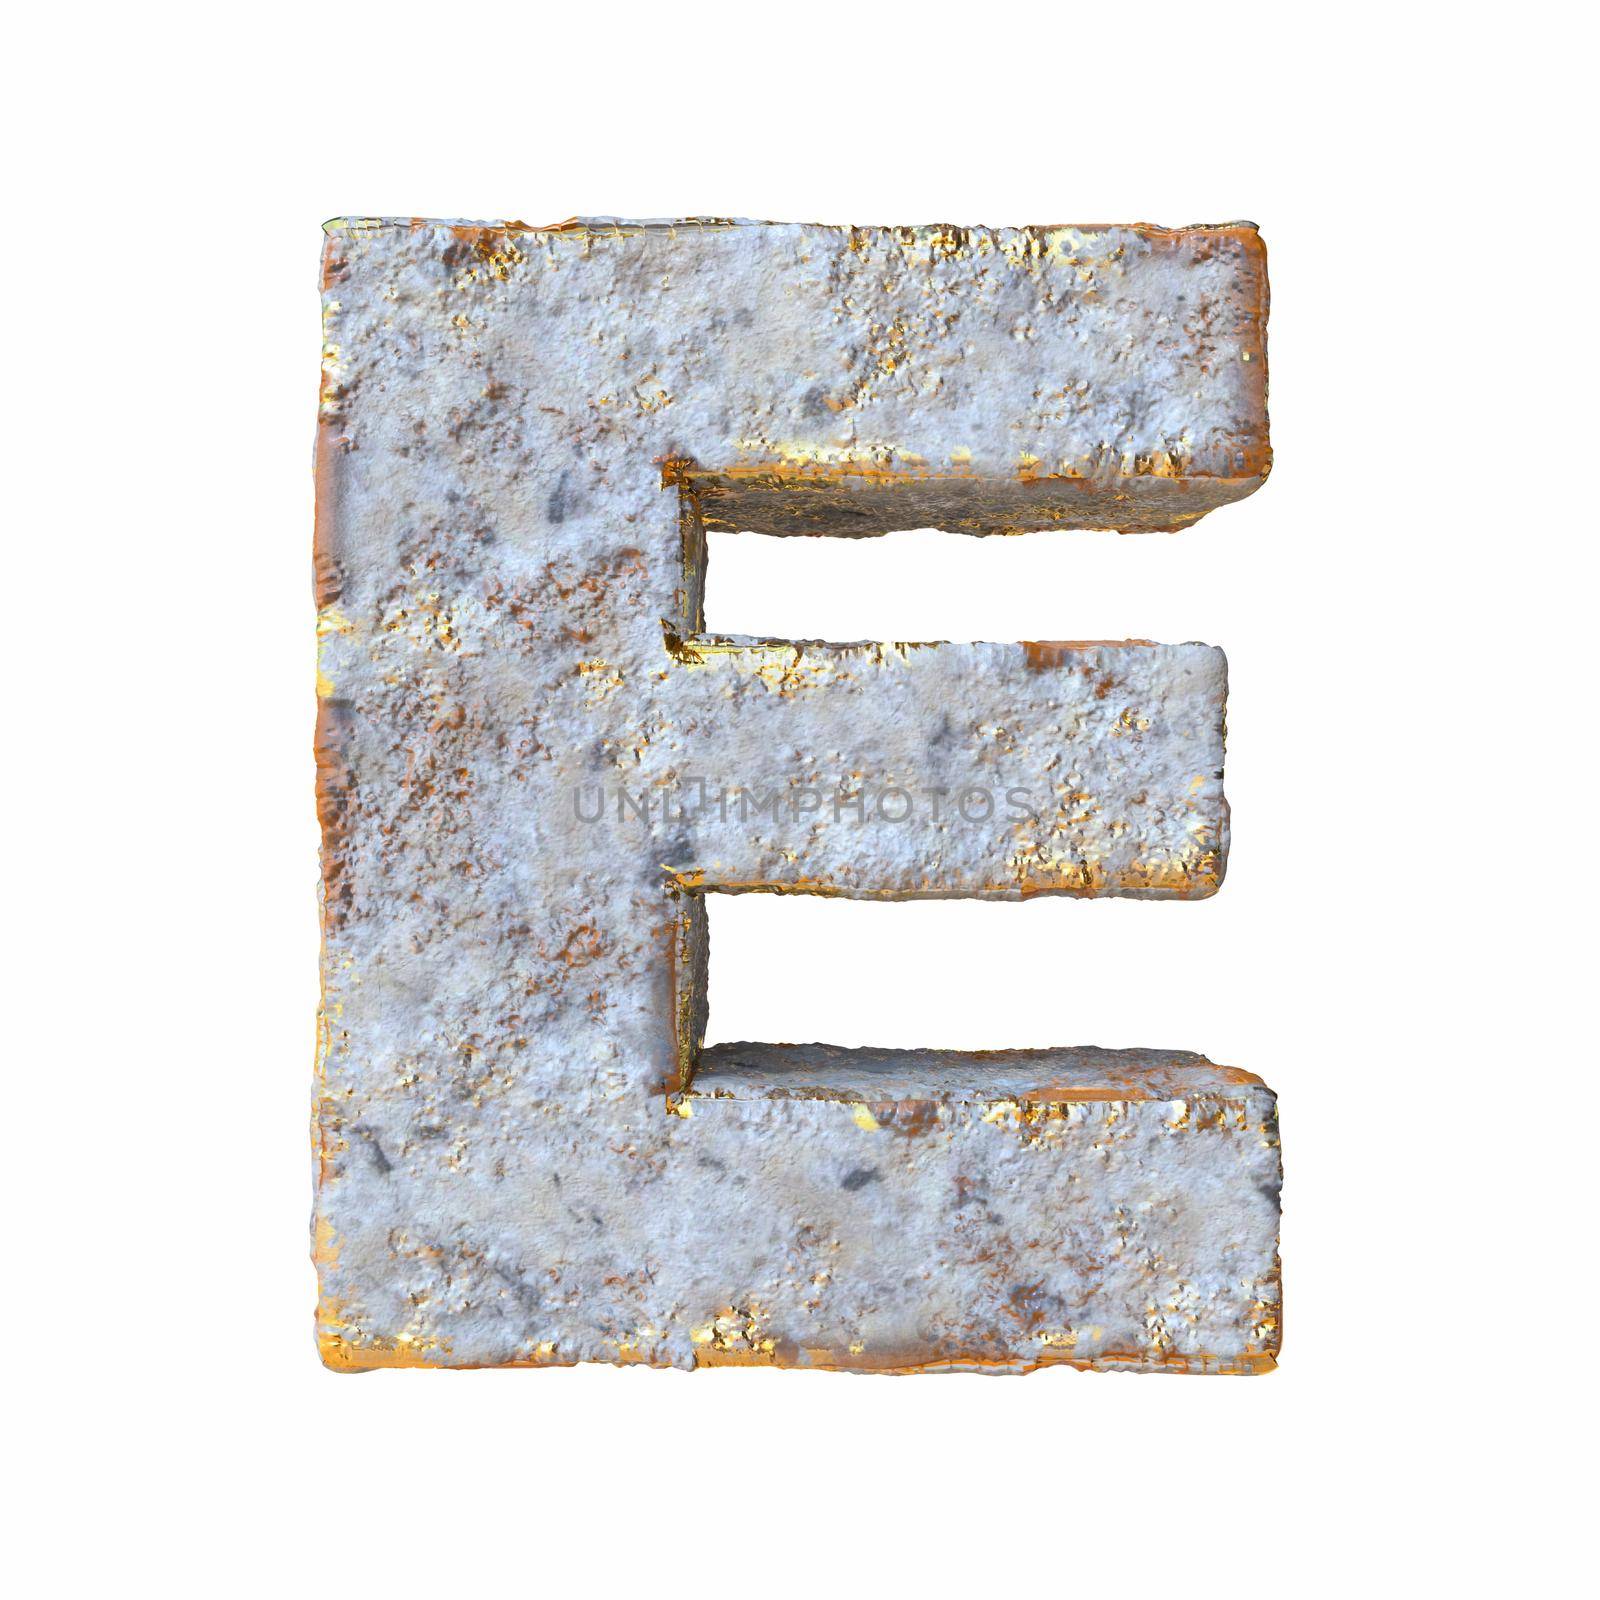 Stone with golden metal particles Letter E 3D rendering illustration isolated on white background